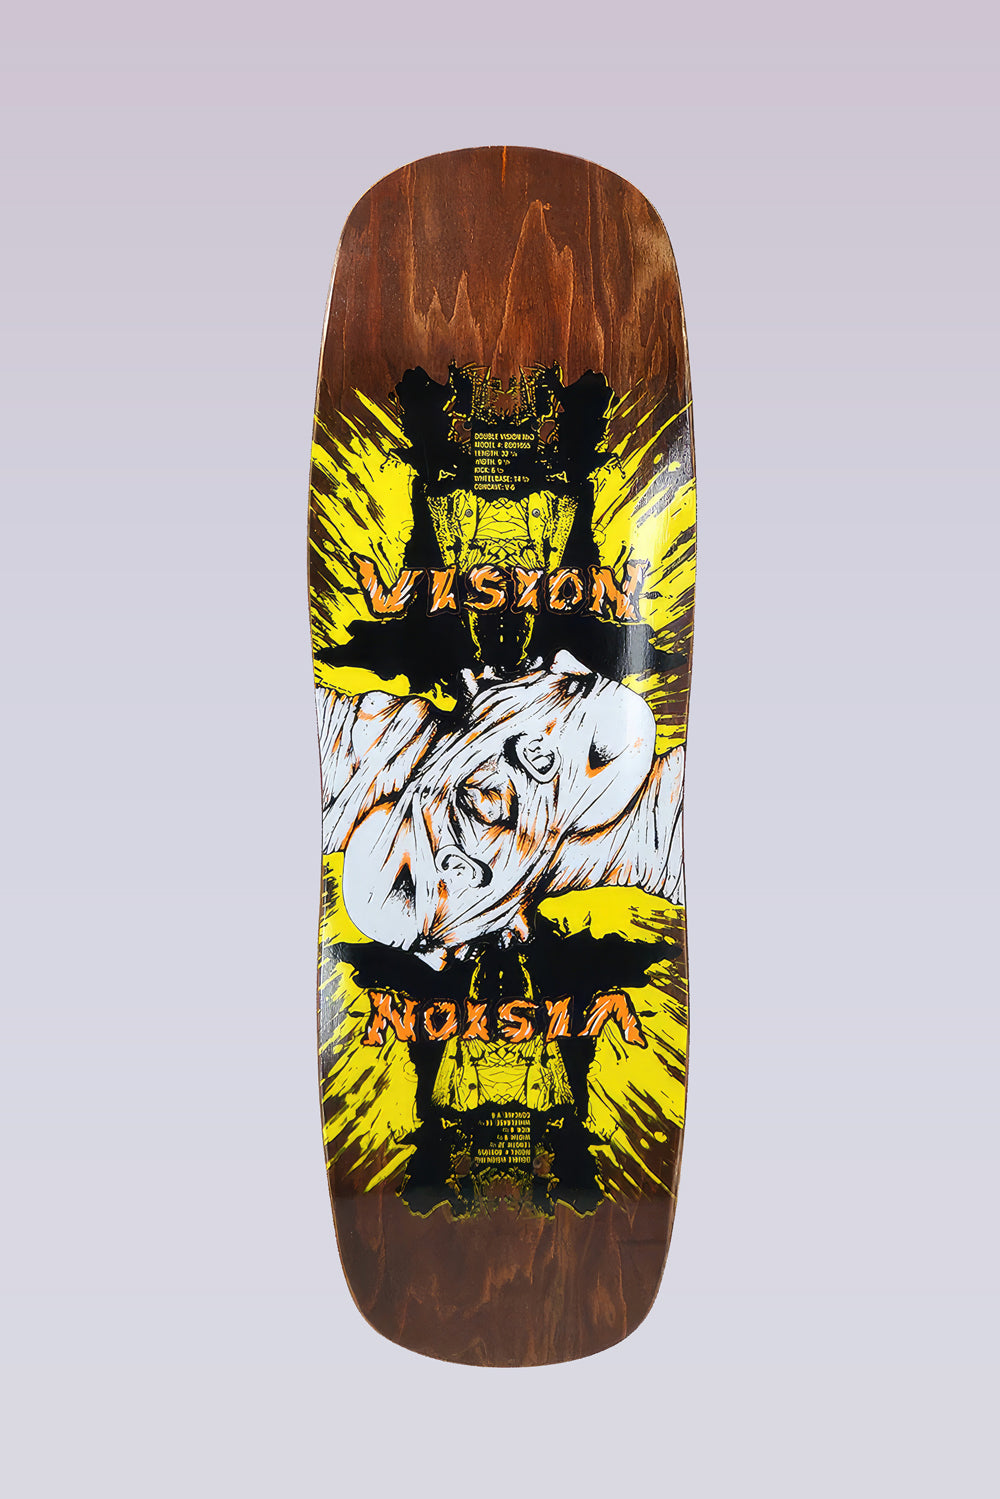 Double Vision Skateboard Deck - 9.5"X32.5" - Brown